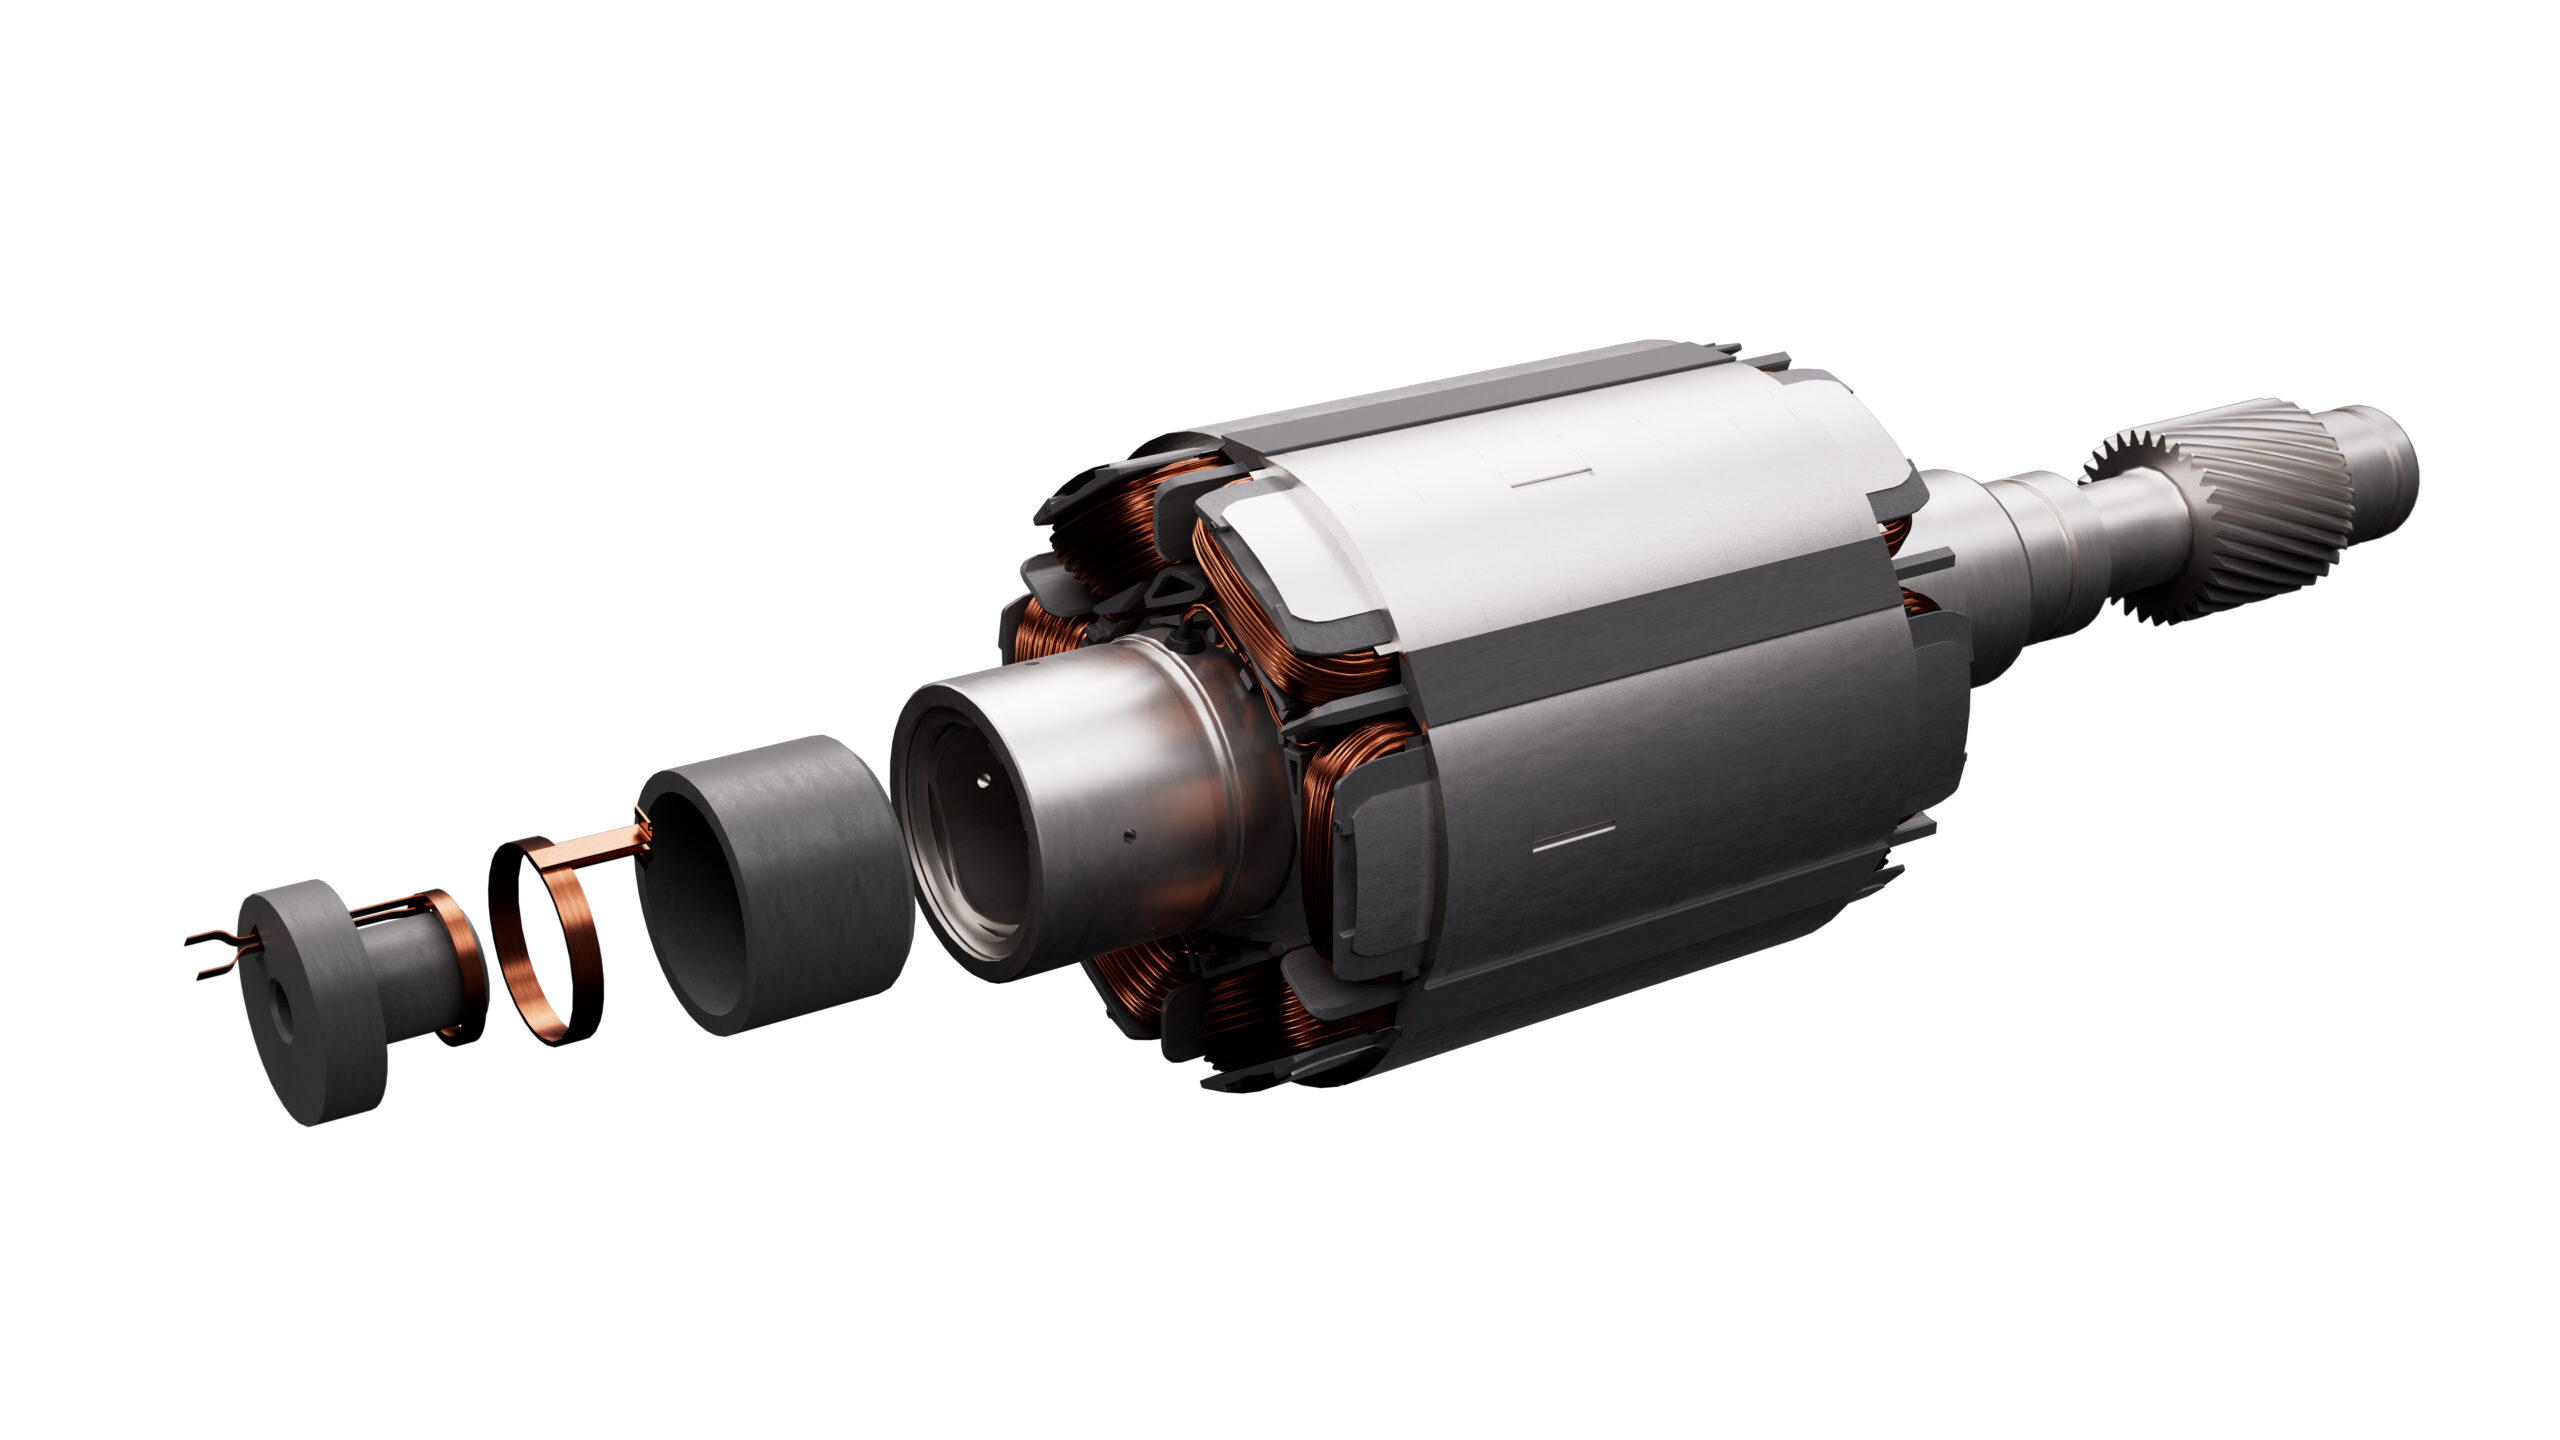 BREAKING! ZF Develops Electric Motor Without A Magnet!